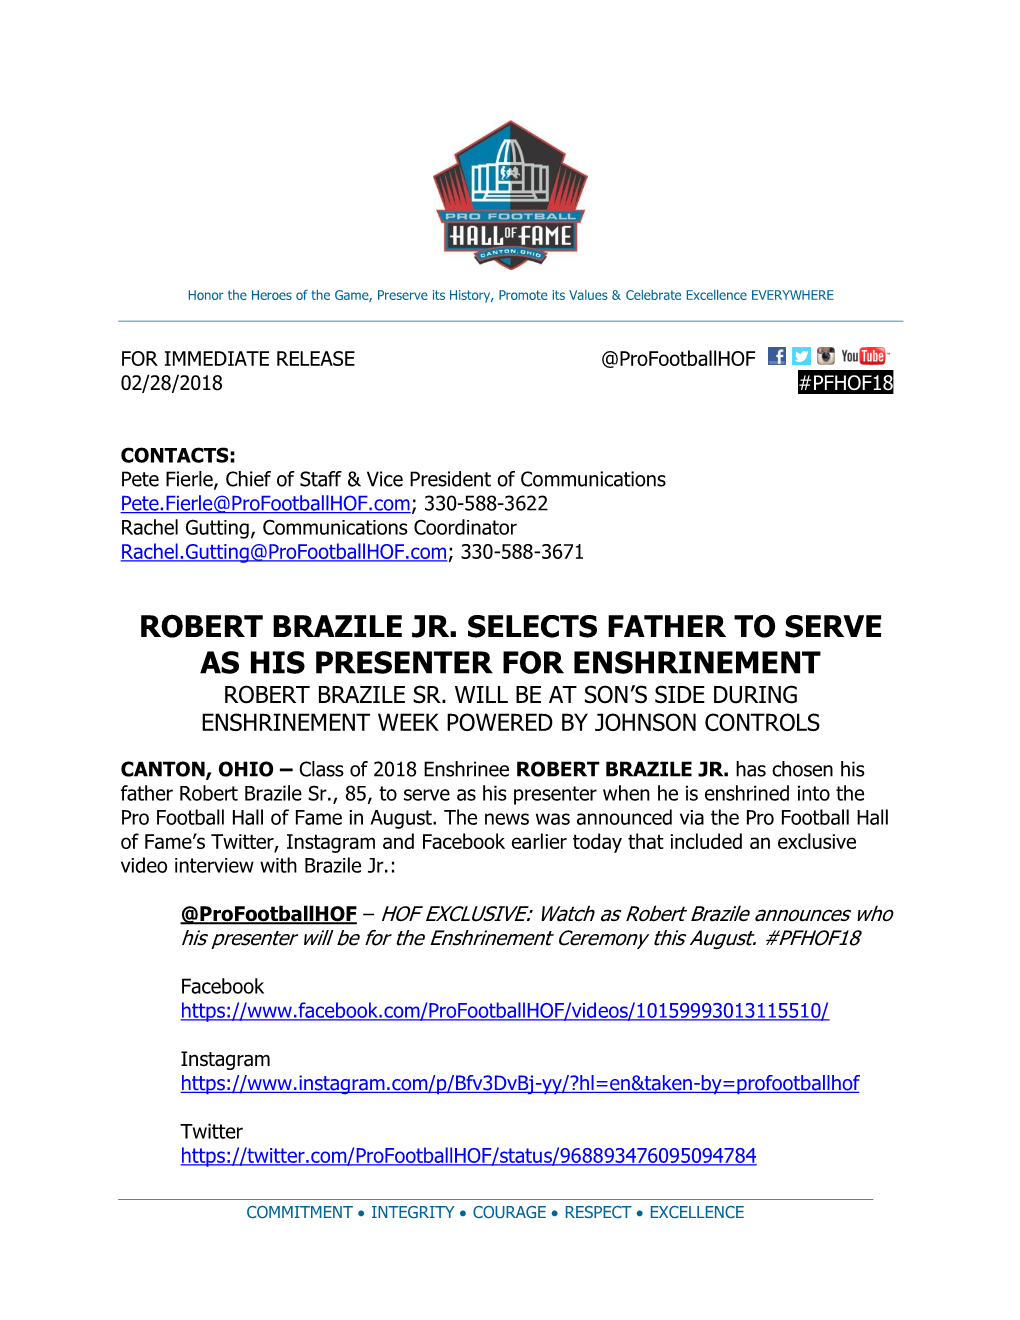 Robert Brazile Jr. Selects Father to Serve As His Presenter for Enshrinement Robert Brazile Sr